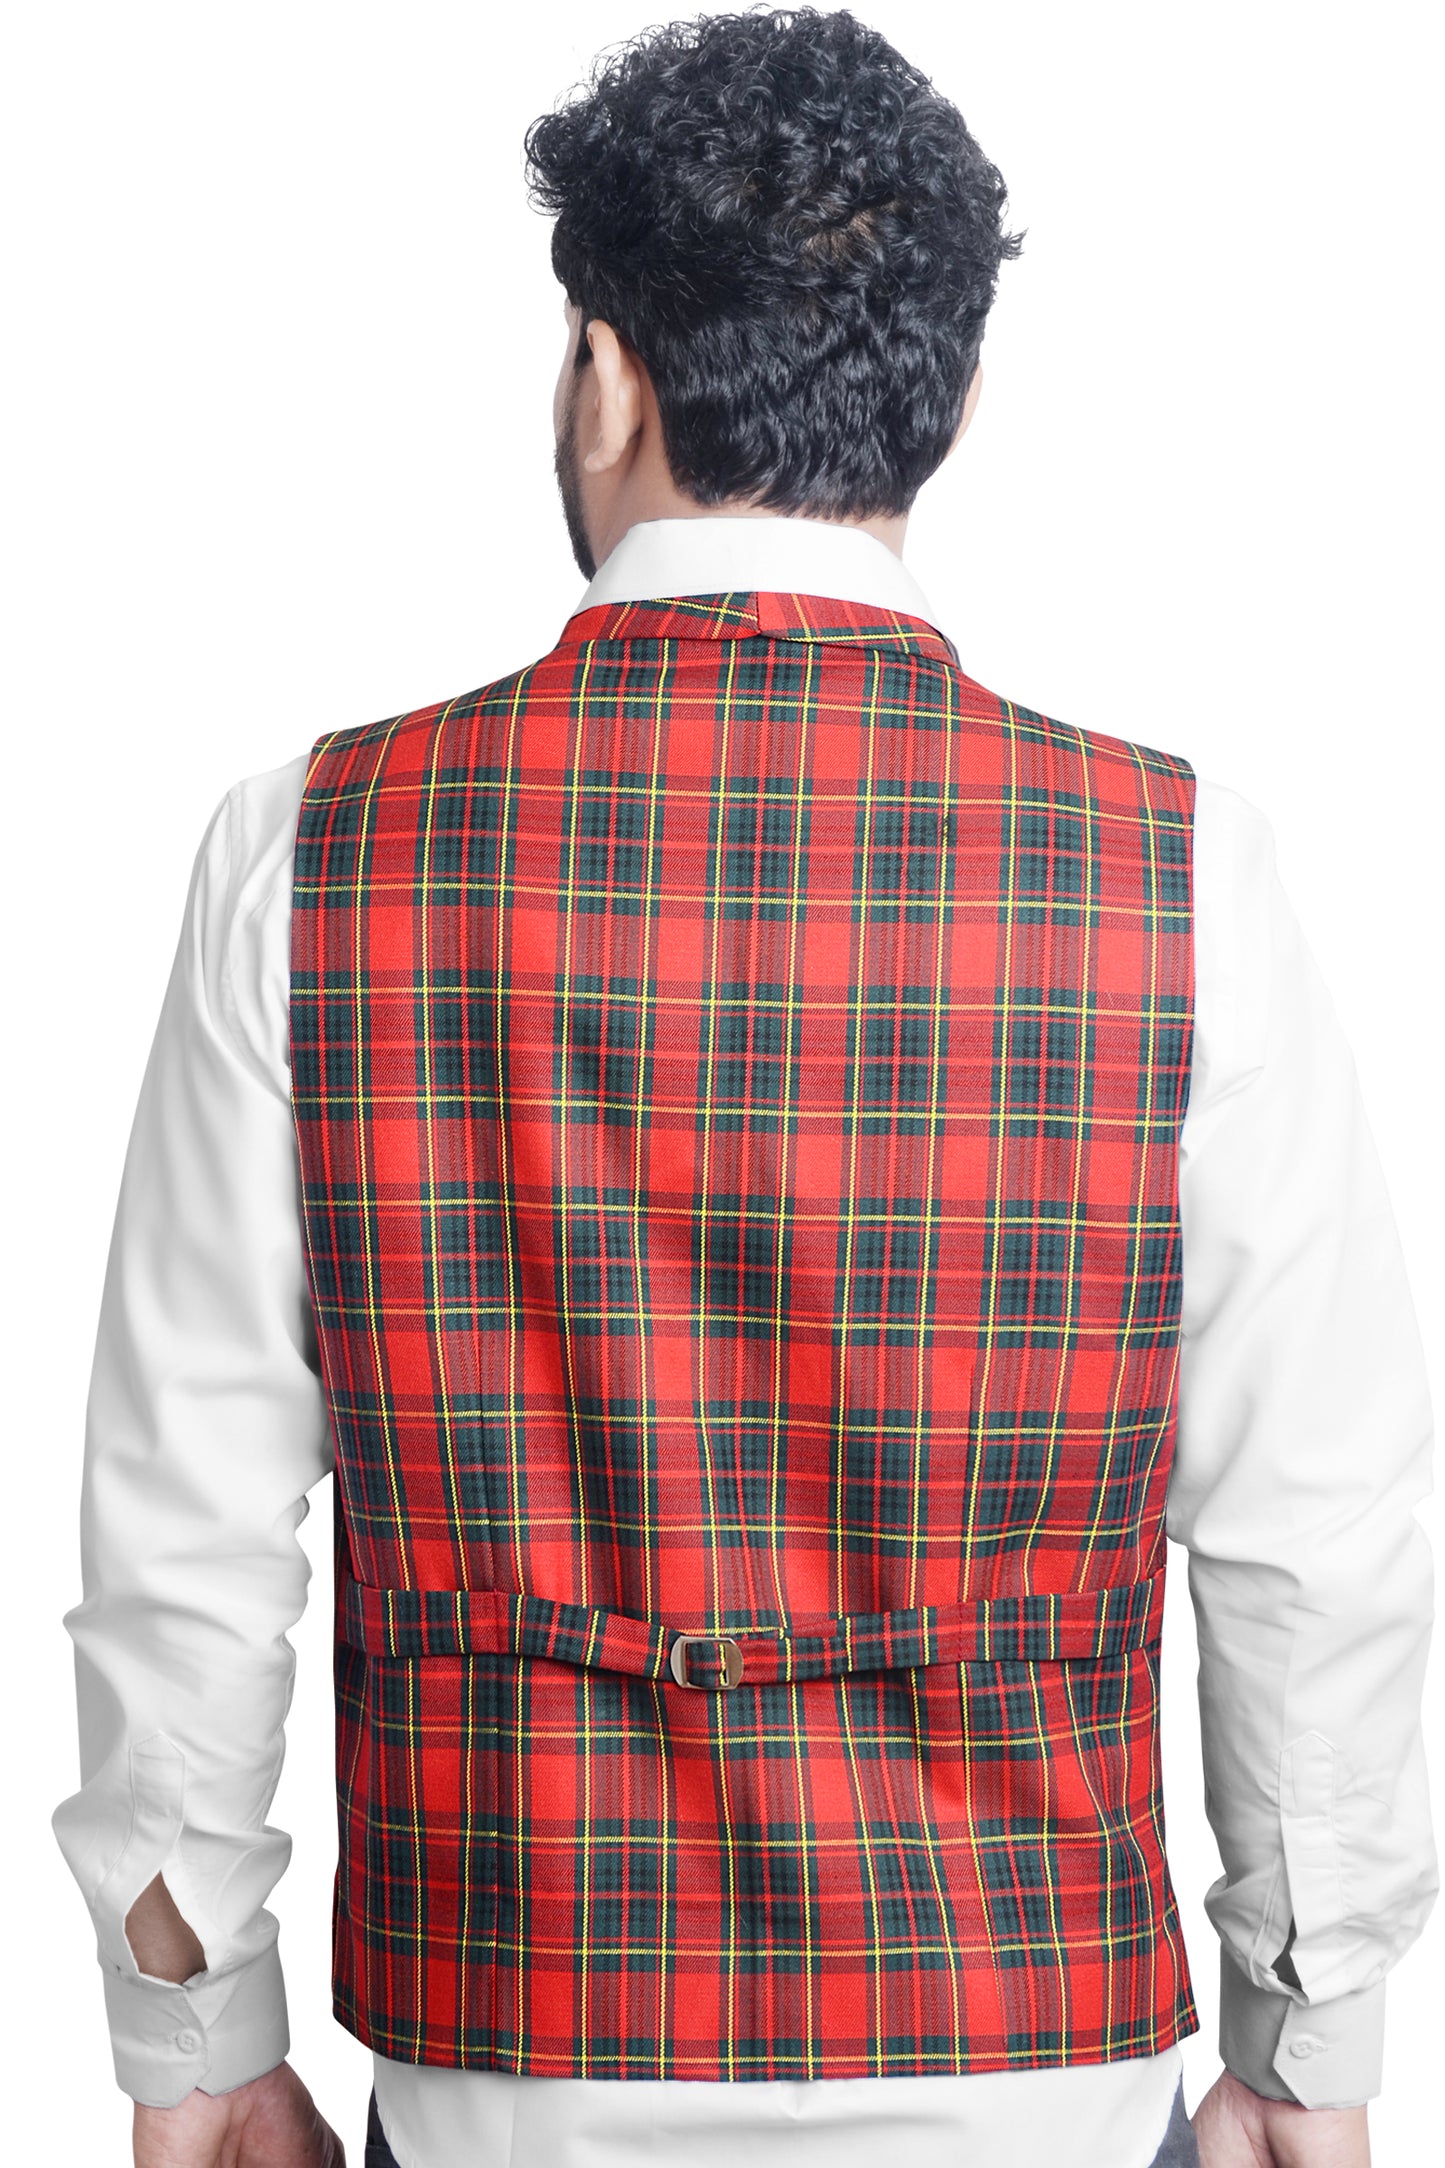 Men's Plaid Double-Breasted Red Waistcoat only